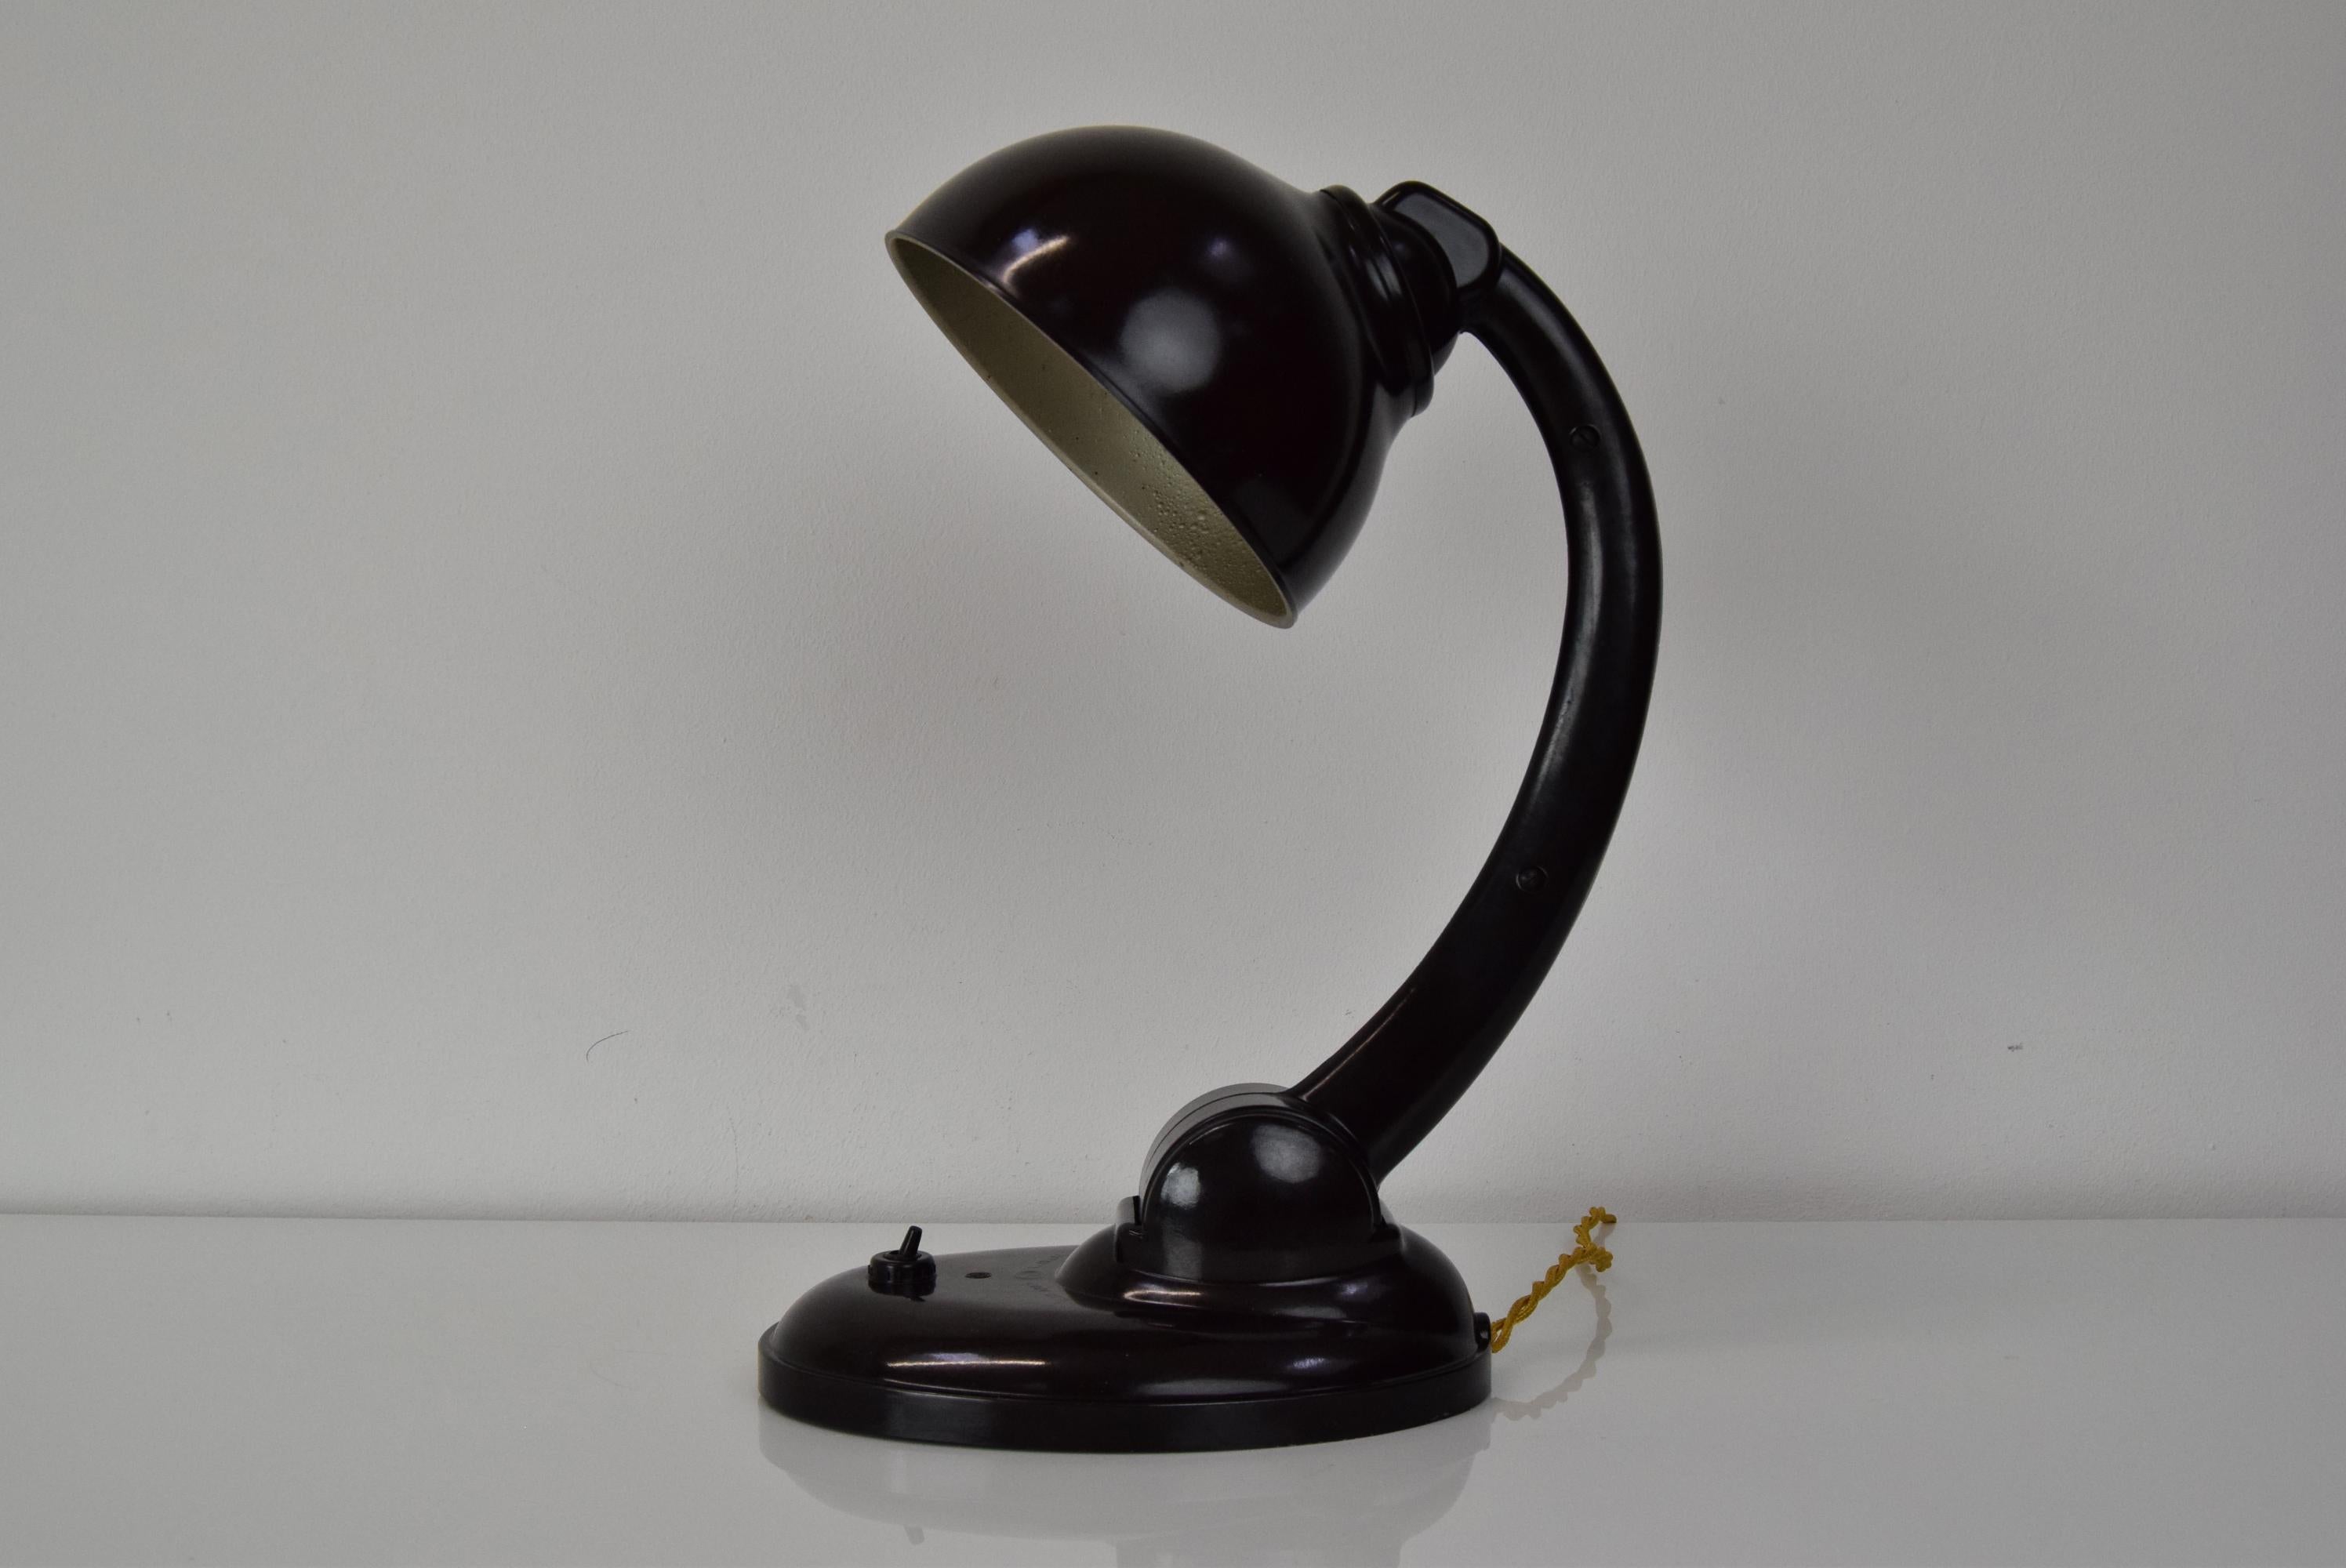 An elegant model
Made in Czechoslovakia
Made of Bakelite
Was instaled new wiring
1x60W,E27 or E26 bulb
Good original condition
US adapter included.